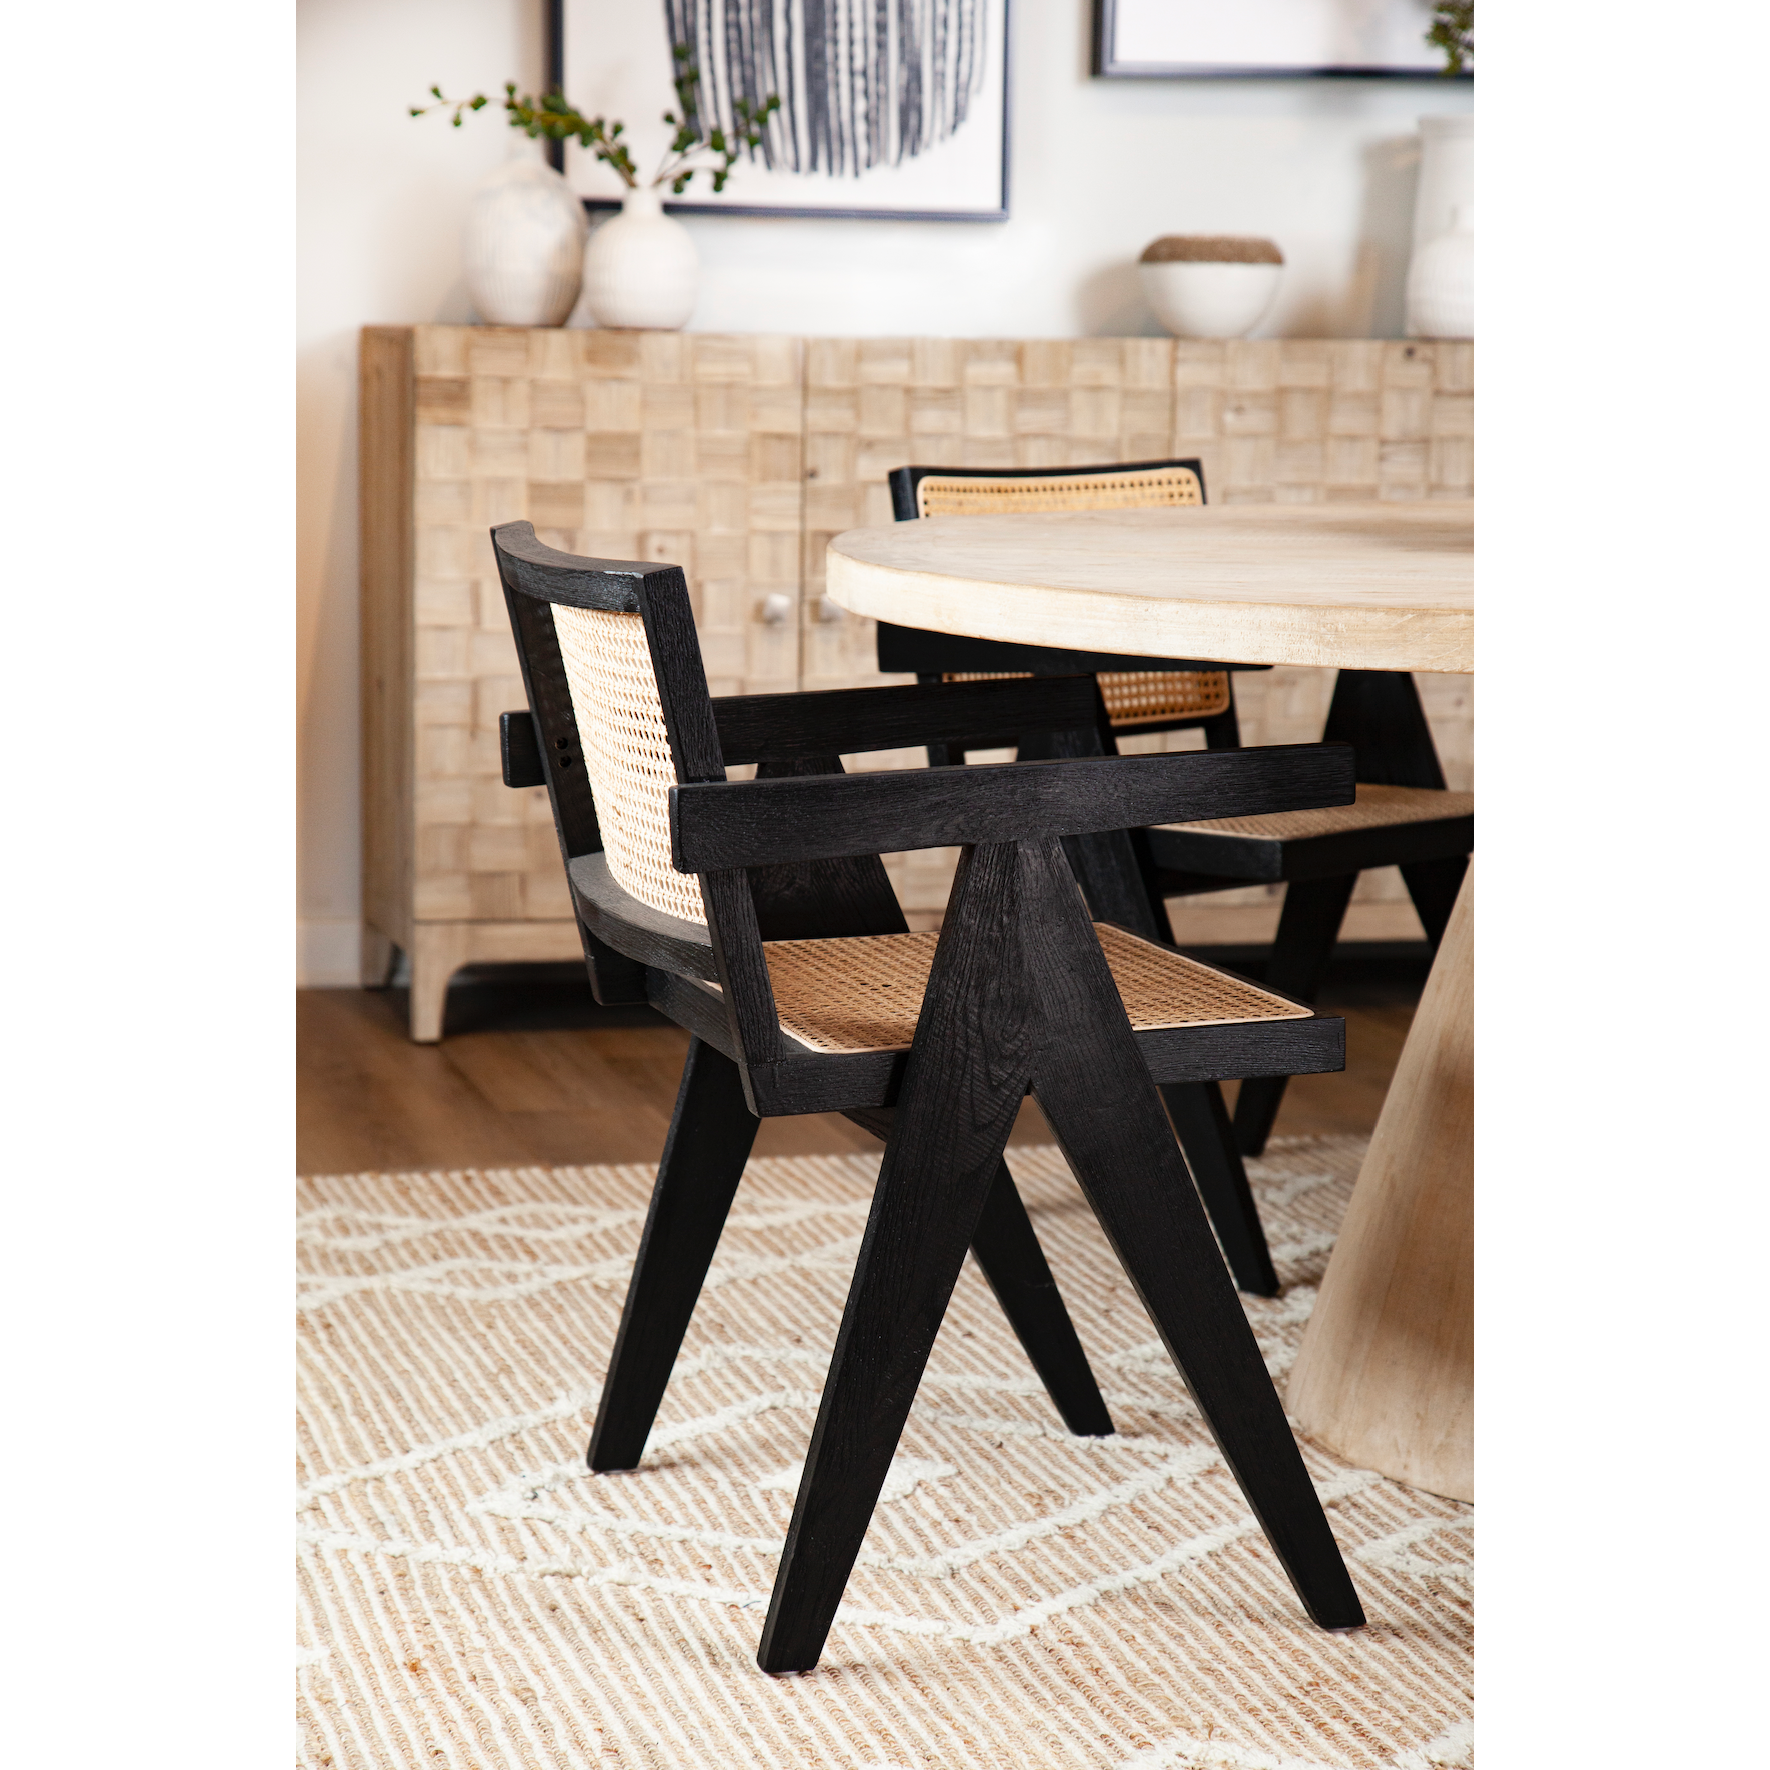 Finished in an antique black and natural rattan, this beautiful Norwich dining chair is modern with a tropical flare. Amethyst Home provides interior design, new construction, custom furniture, and area rugs in the Denver metro area.